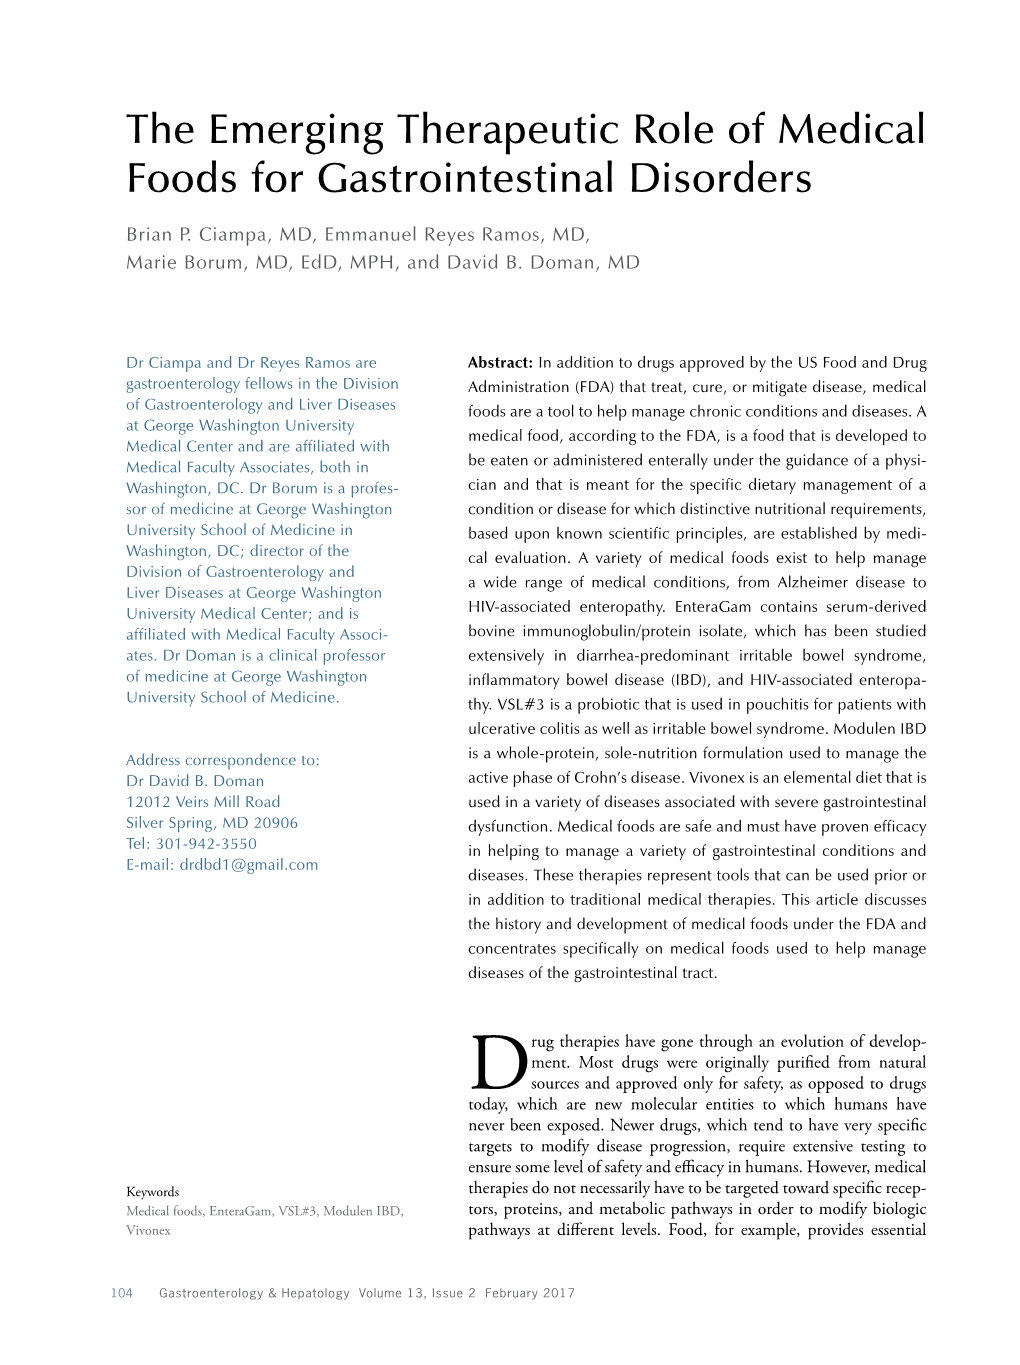 The Emerging Therapeutic Role of Medical Foods for Gastrointestinal Disorders